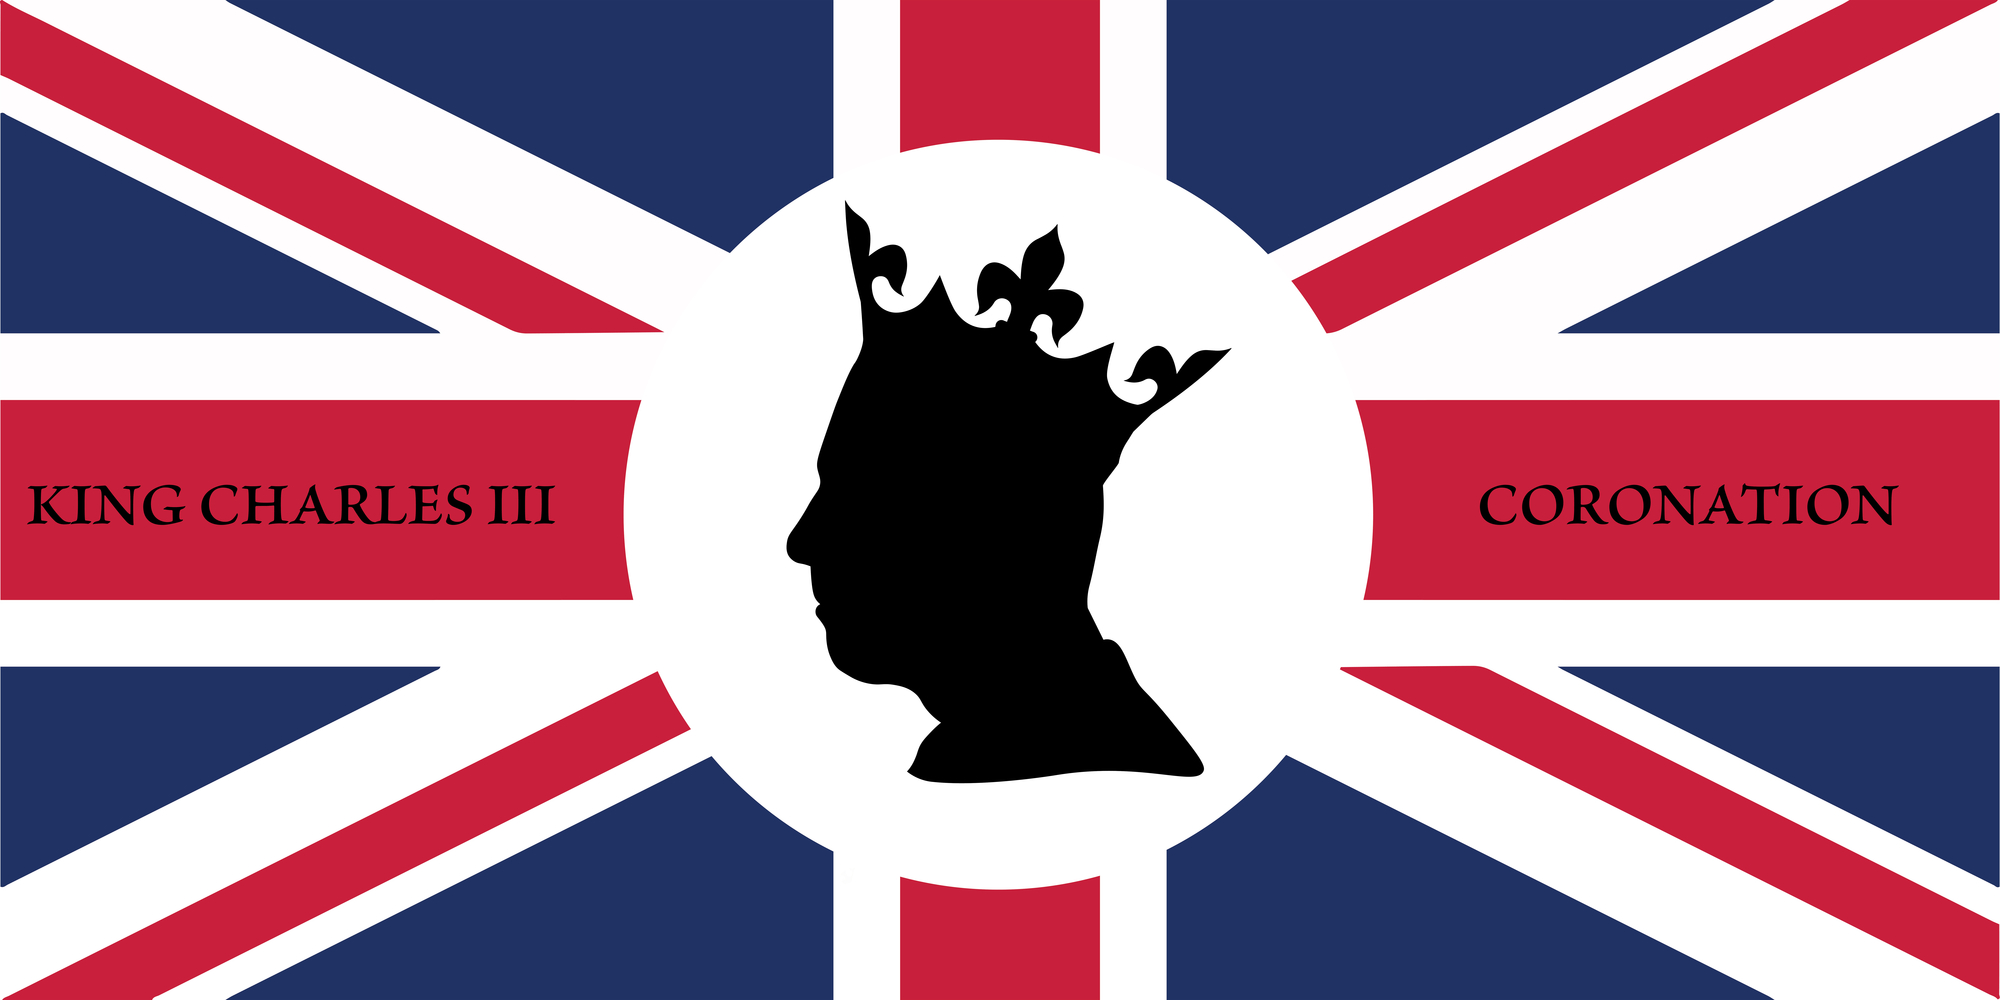 uk union jack flag with silhouette of king charles iii with text coronation of king charles iii